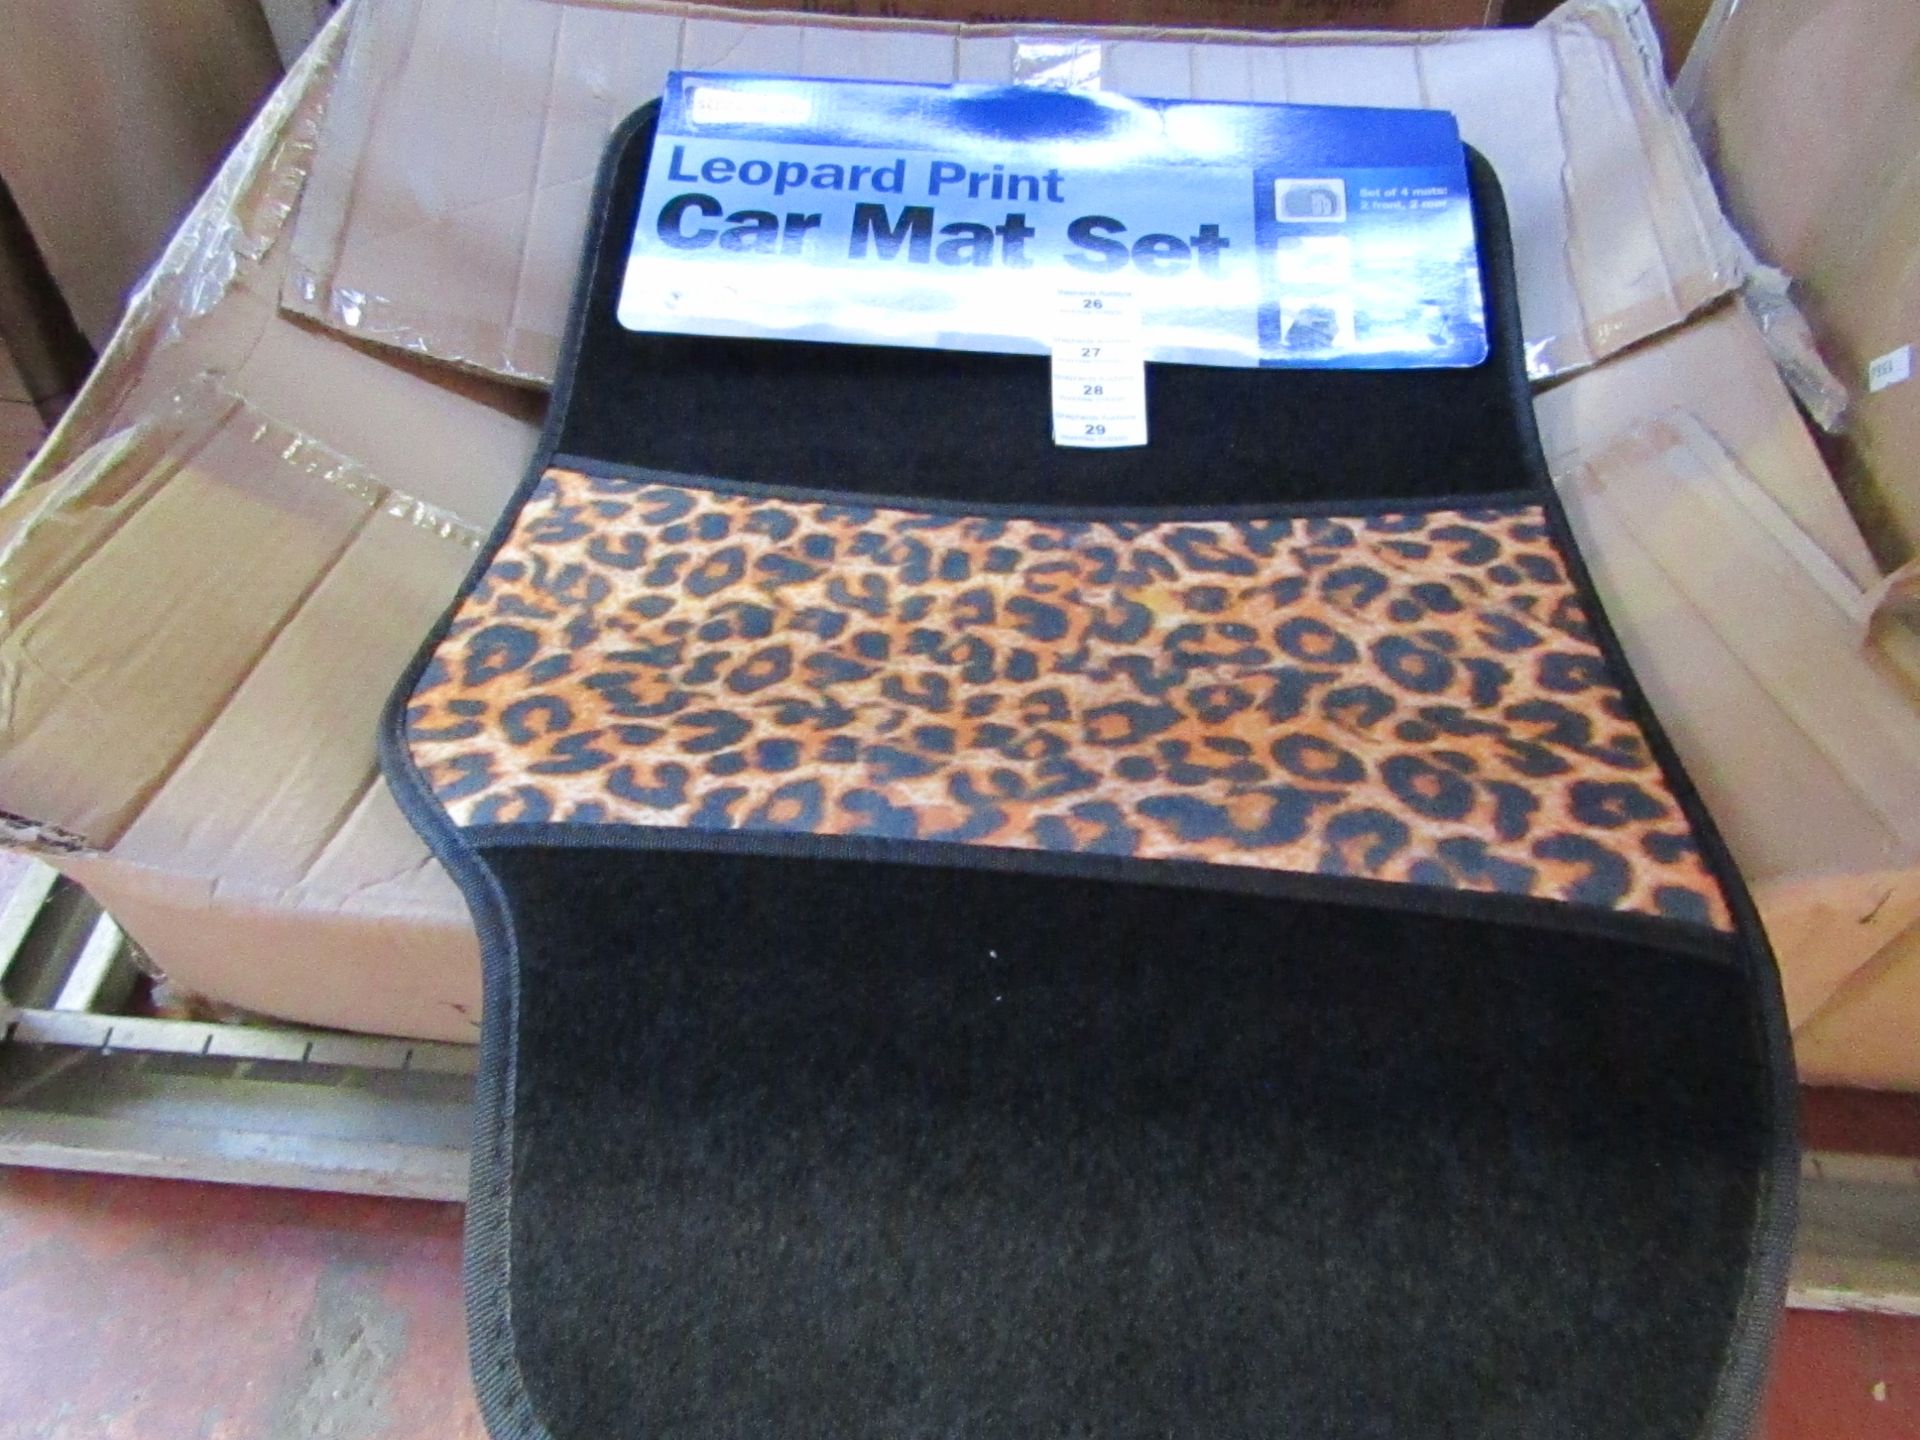 Set of 4 leopard print car mats, new and packaged.